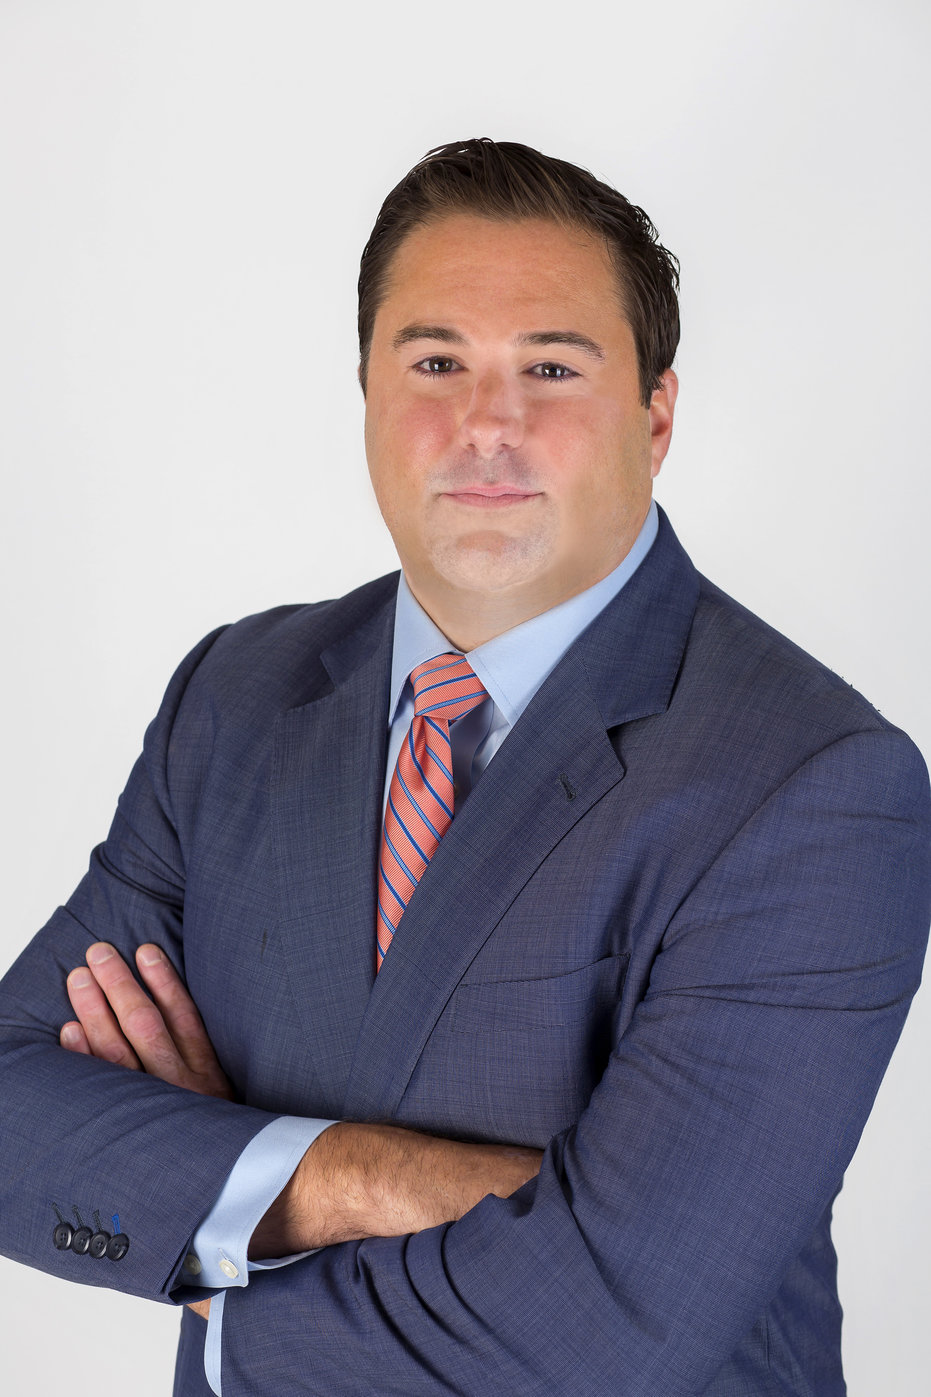 Jeremy S. Piccini, founding partner of Bertone Piccini. He added, "The new hires are truly a testament to our reputation and ongoing growth."